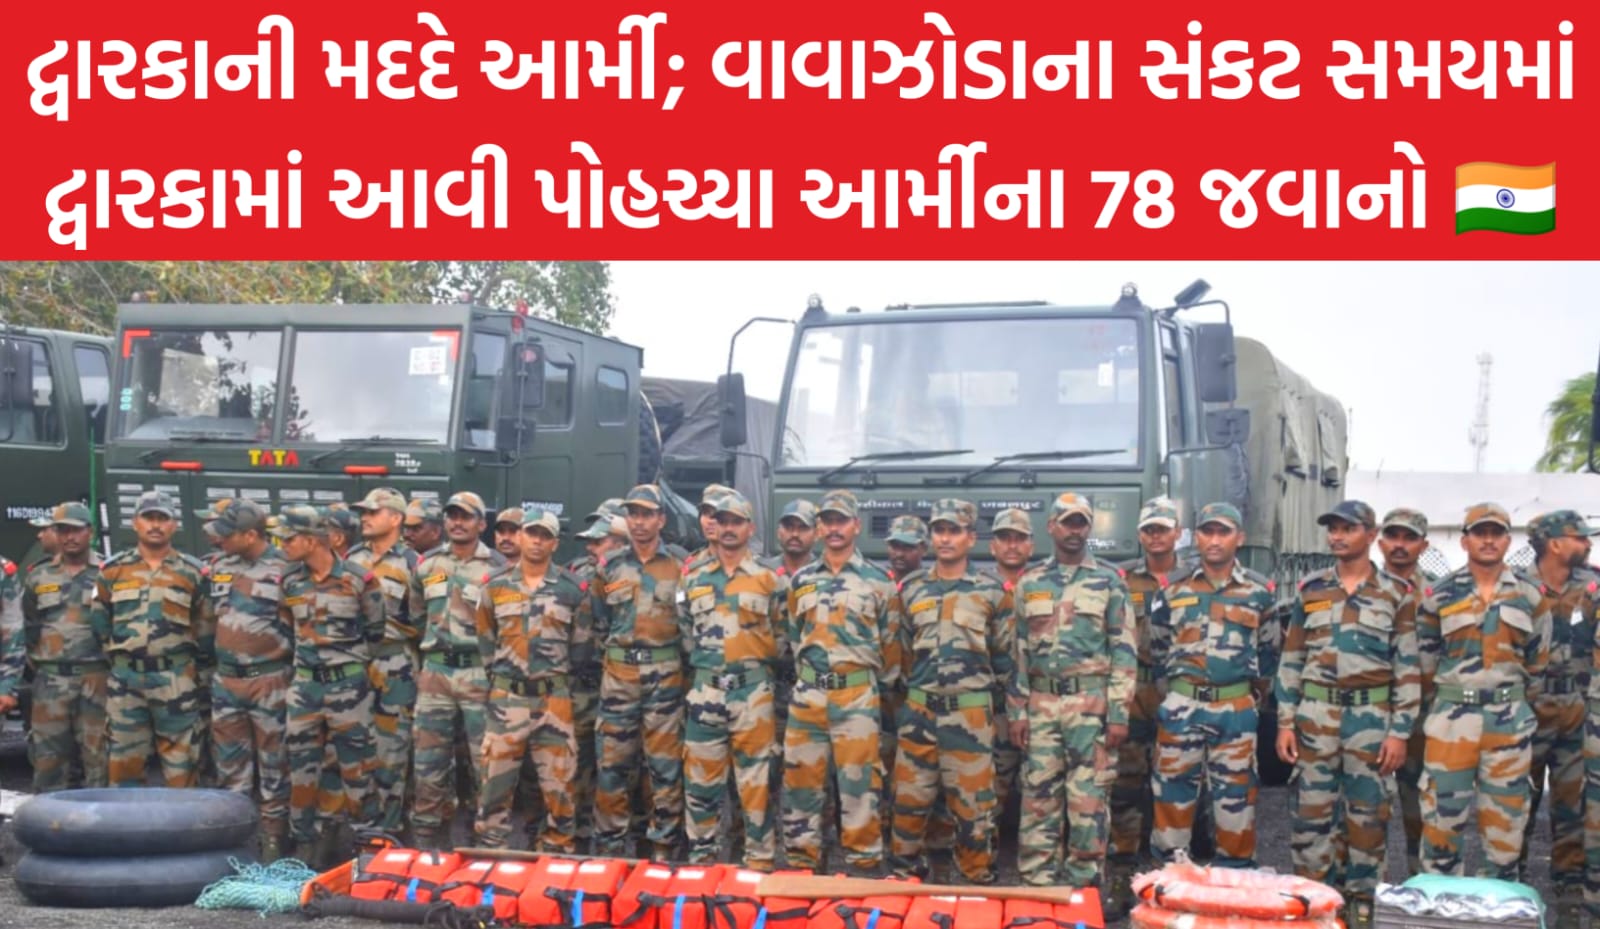 Army with the help of Dwarka